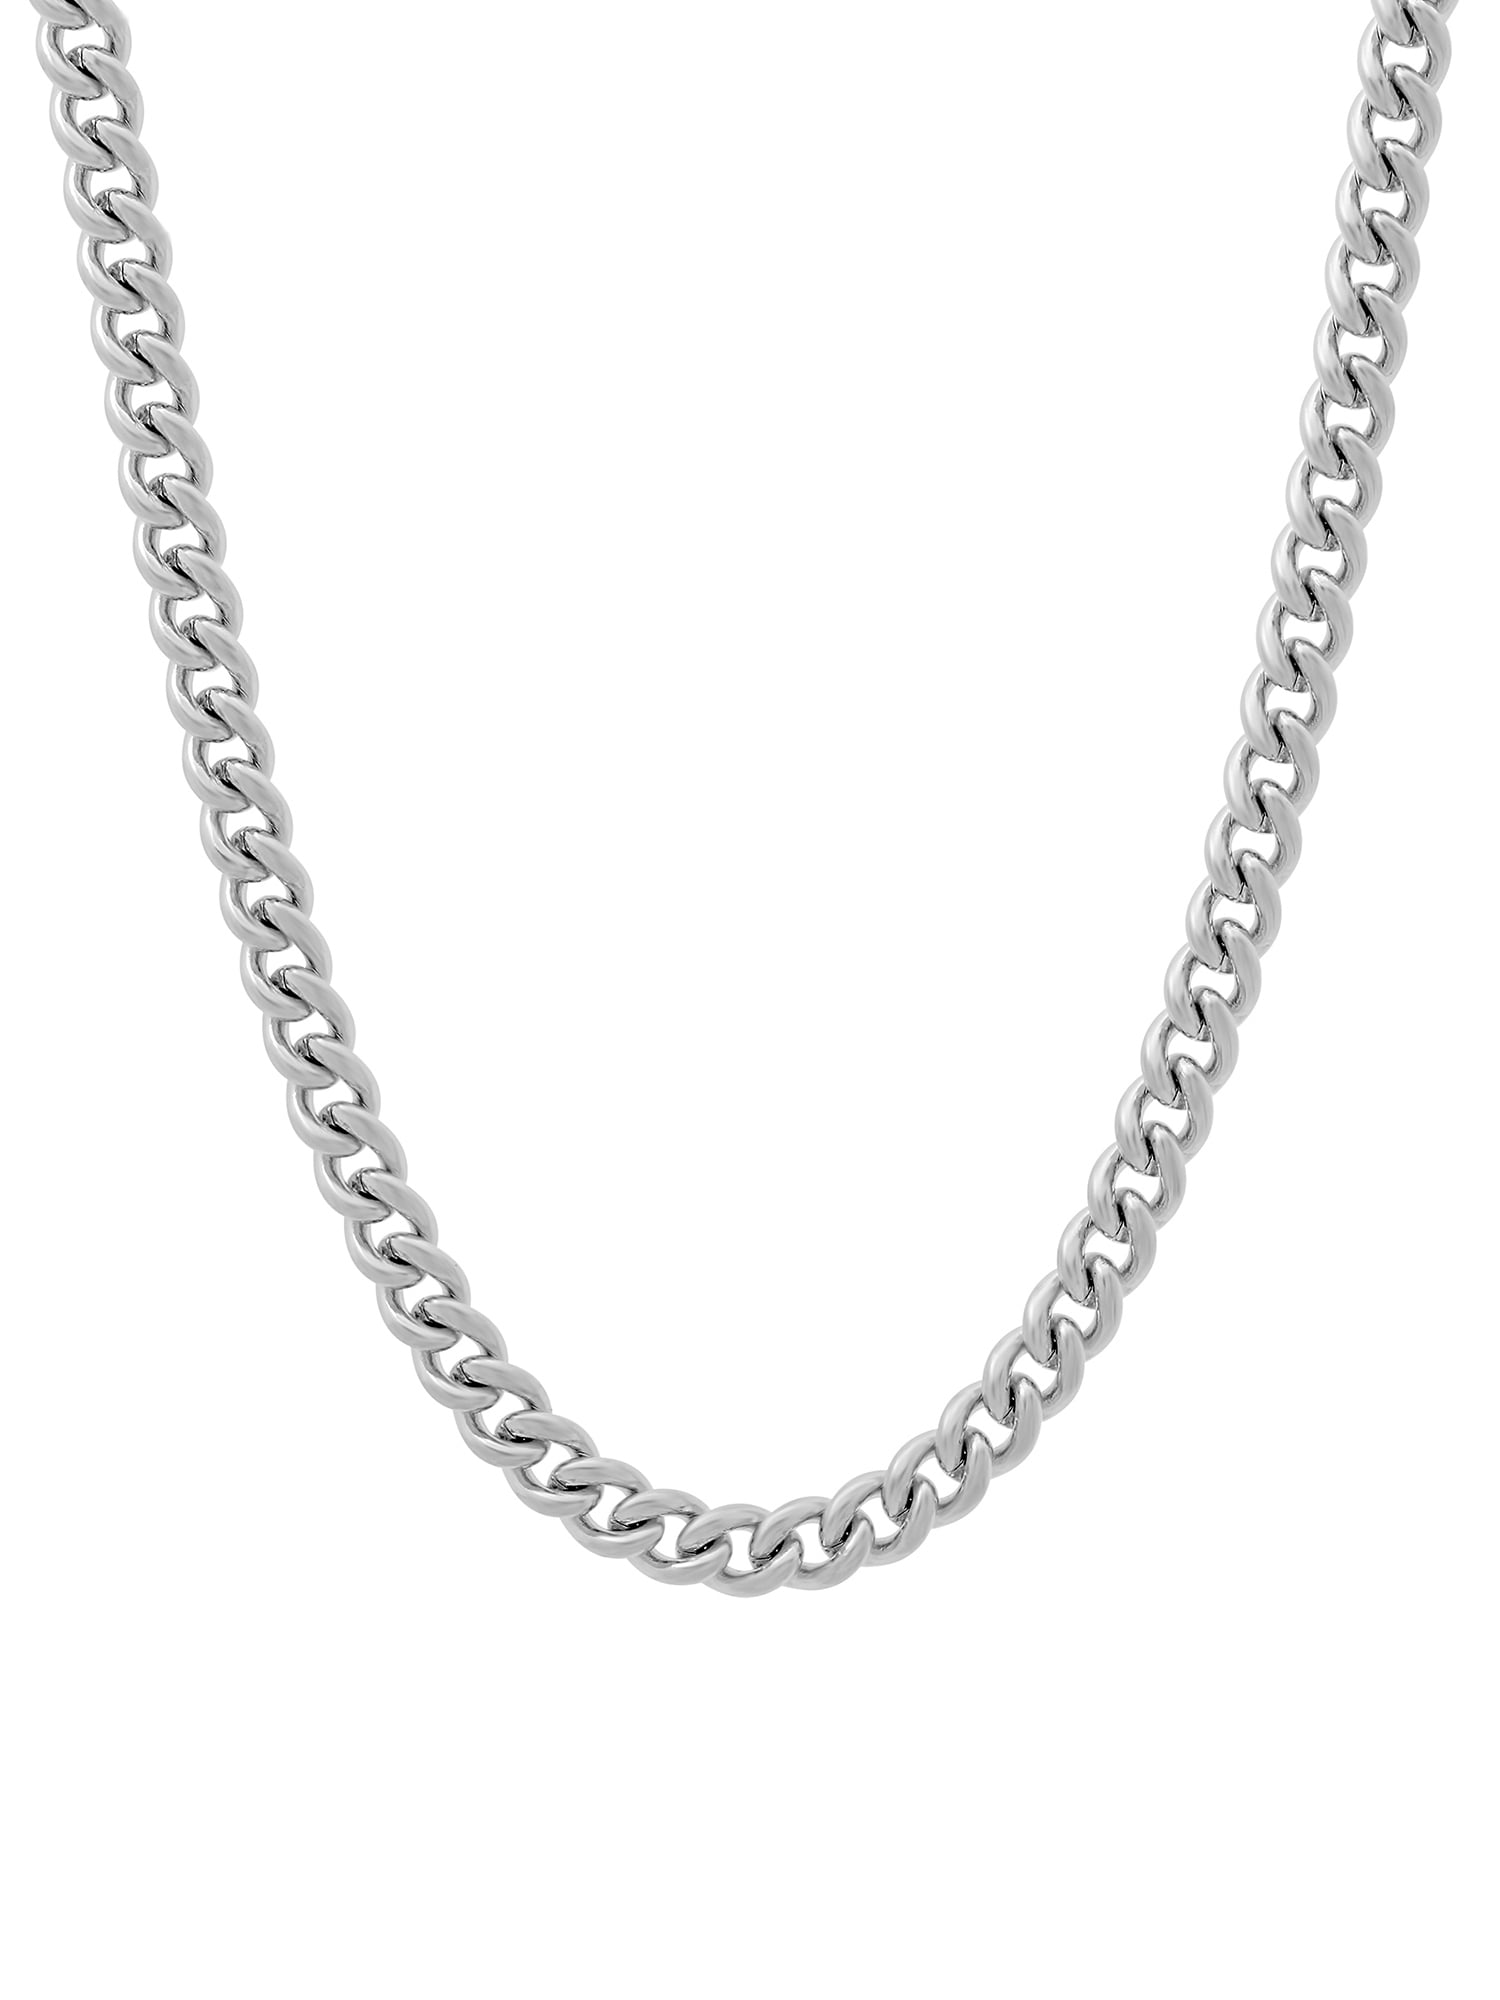 Mens Silver-Tone Stainless Steel Curb Link Chain Necklace